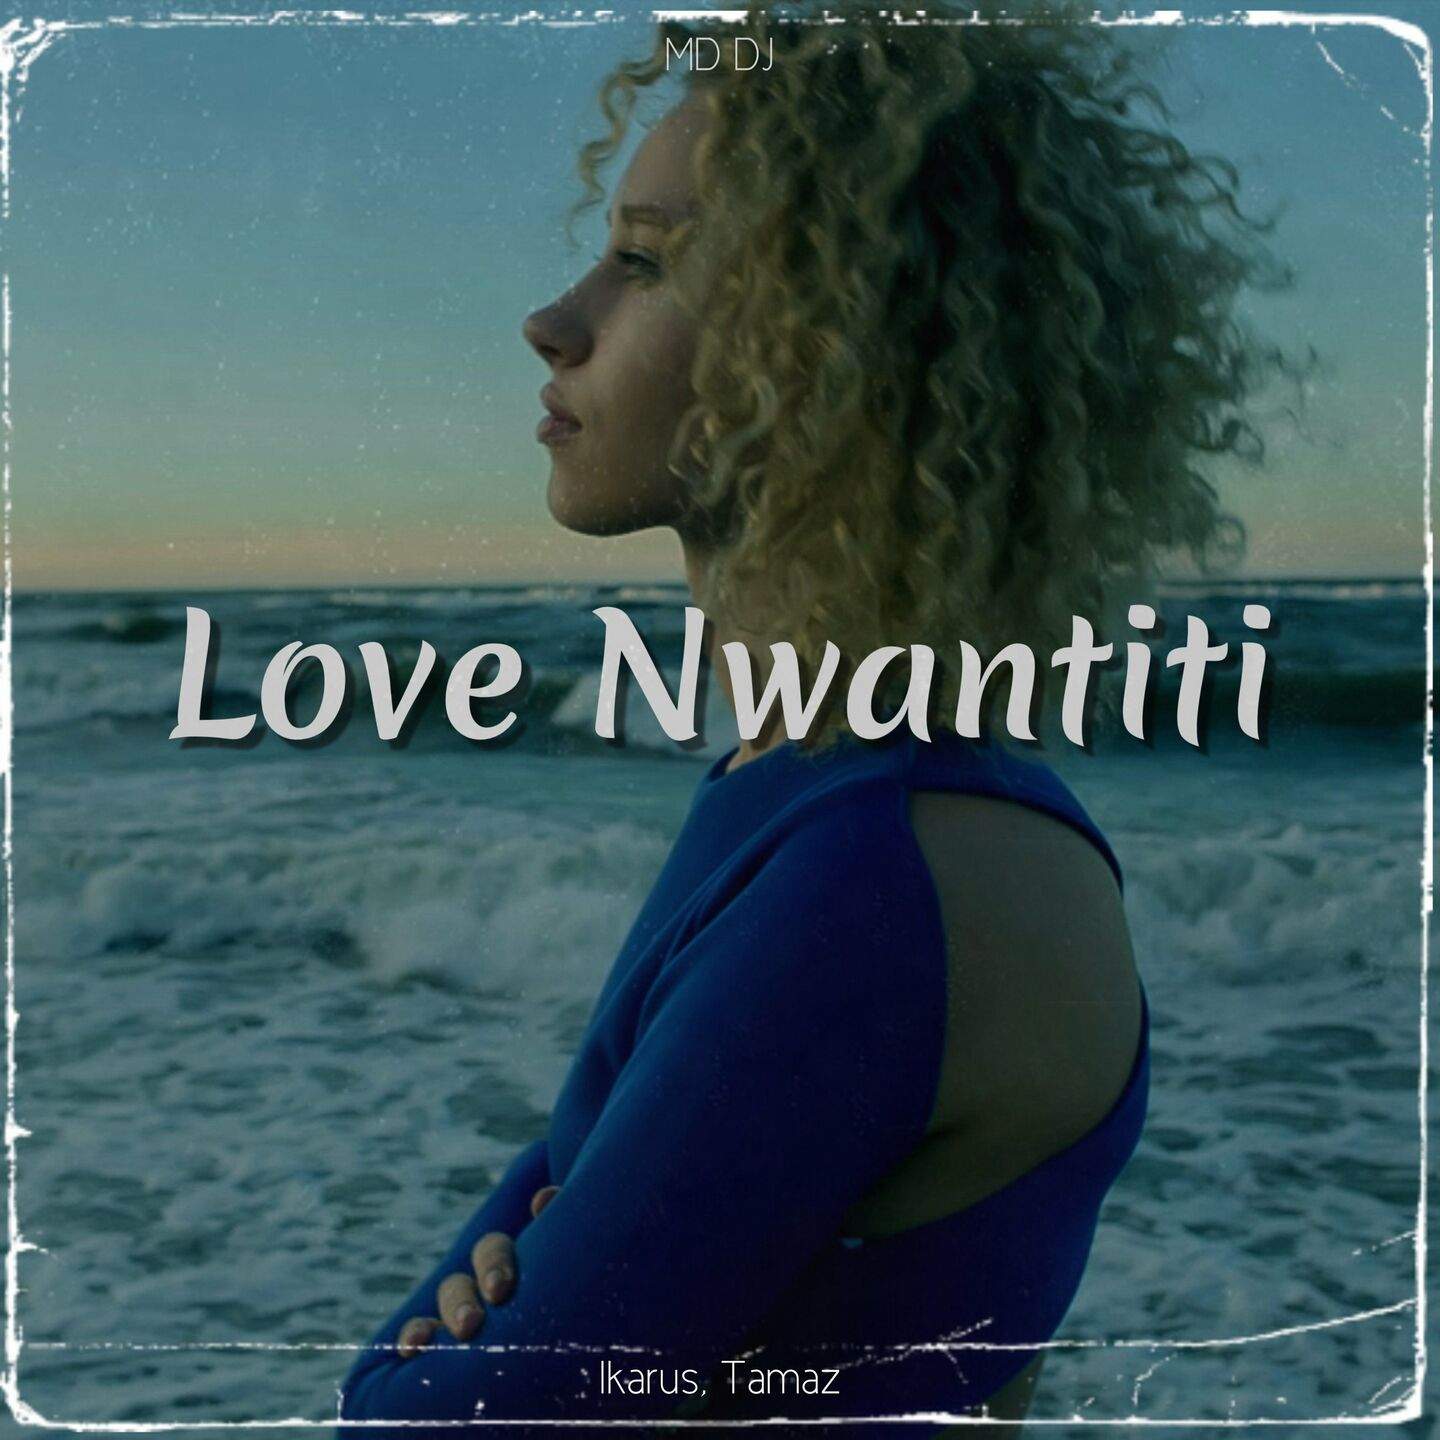 Love Nwantiti (Extended) -
                    Luxe radio